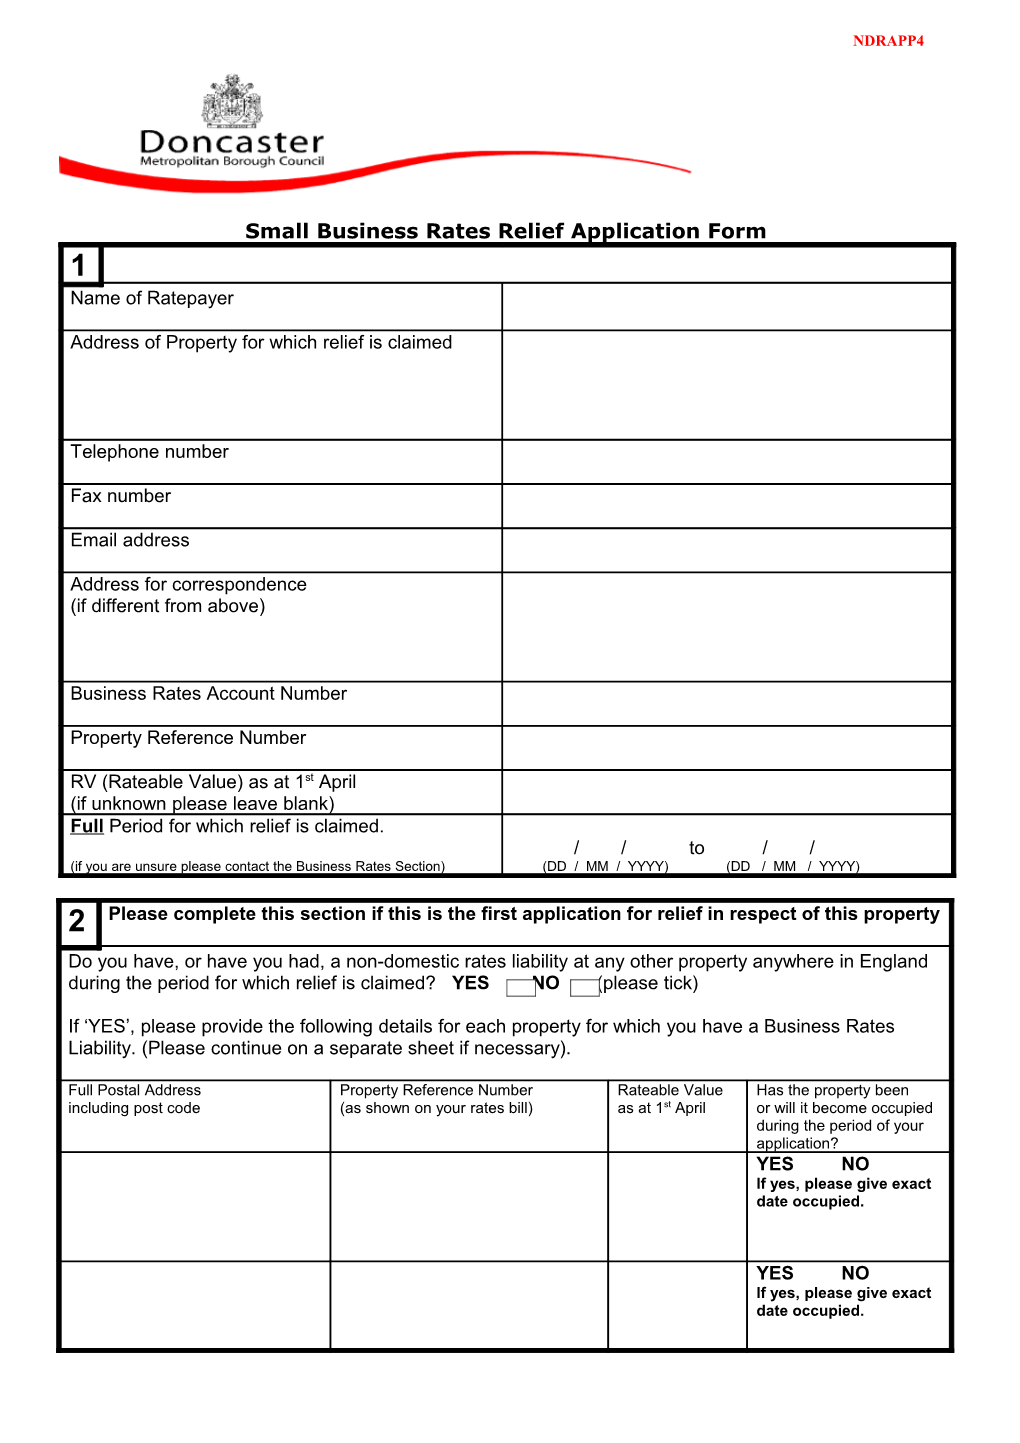 Small Business Rates Relief Application Form